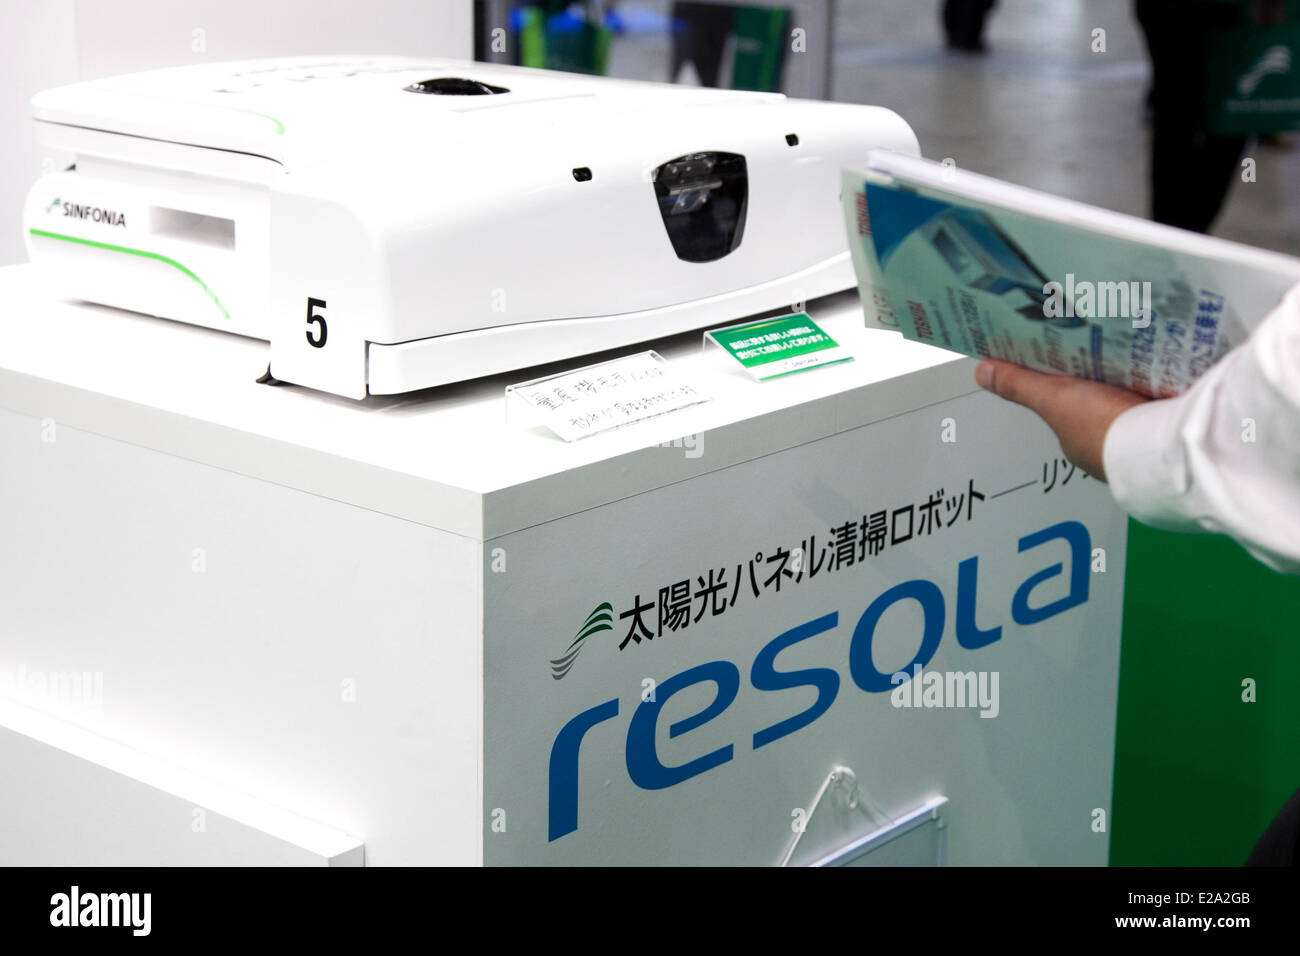 Tokyo, Japan. 18th June, 2014. – The solar panel cleaner 'RESOLA' at the Smart Community Japan 2014 in Tokyo Big Sight on June 18, 2014. The exhibition brings the latests products and technologies divided in 5 categories, 'Smart Community Exhibition', 'Biomass Expo', 'Next Generation Vehicle Exhibition, and newly-created 'Community Cloud 2014', which introduces technology for urban development. This year 229 enterprises and organizations shows their products from June 18th to 20th. Credit:  Aflo Co. Ltd./Alamy Live News Stock Photo